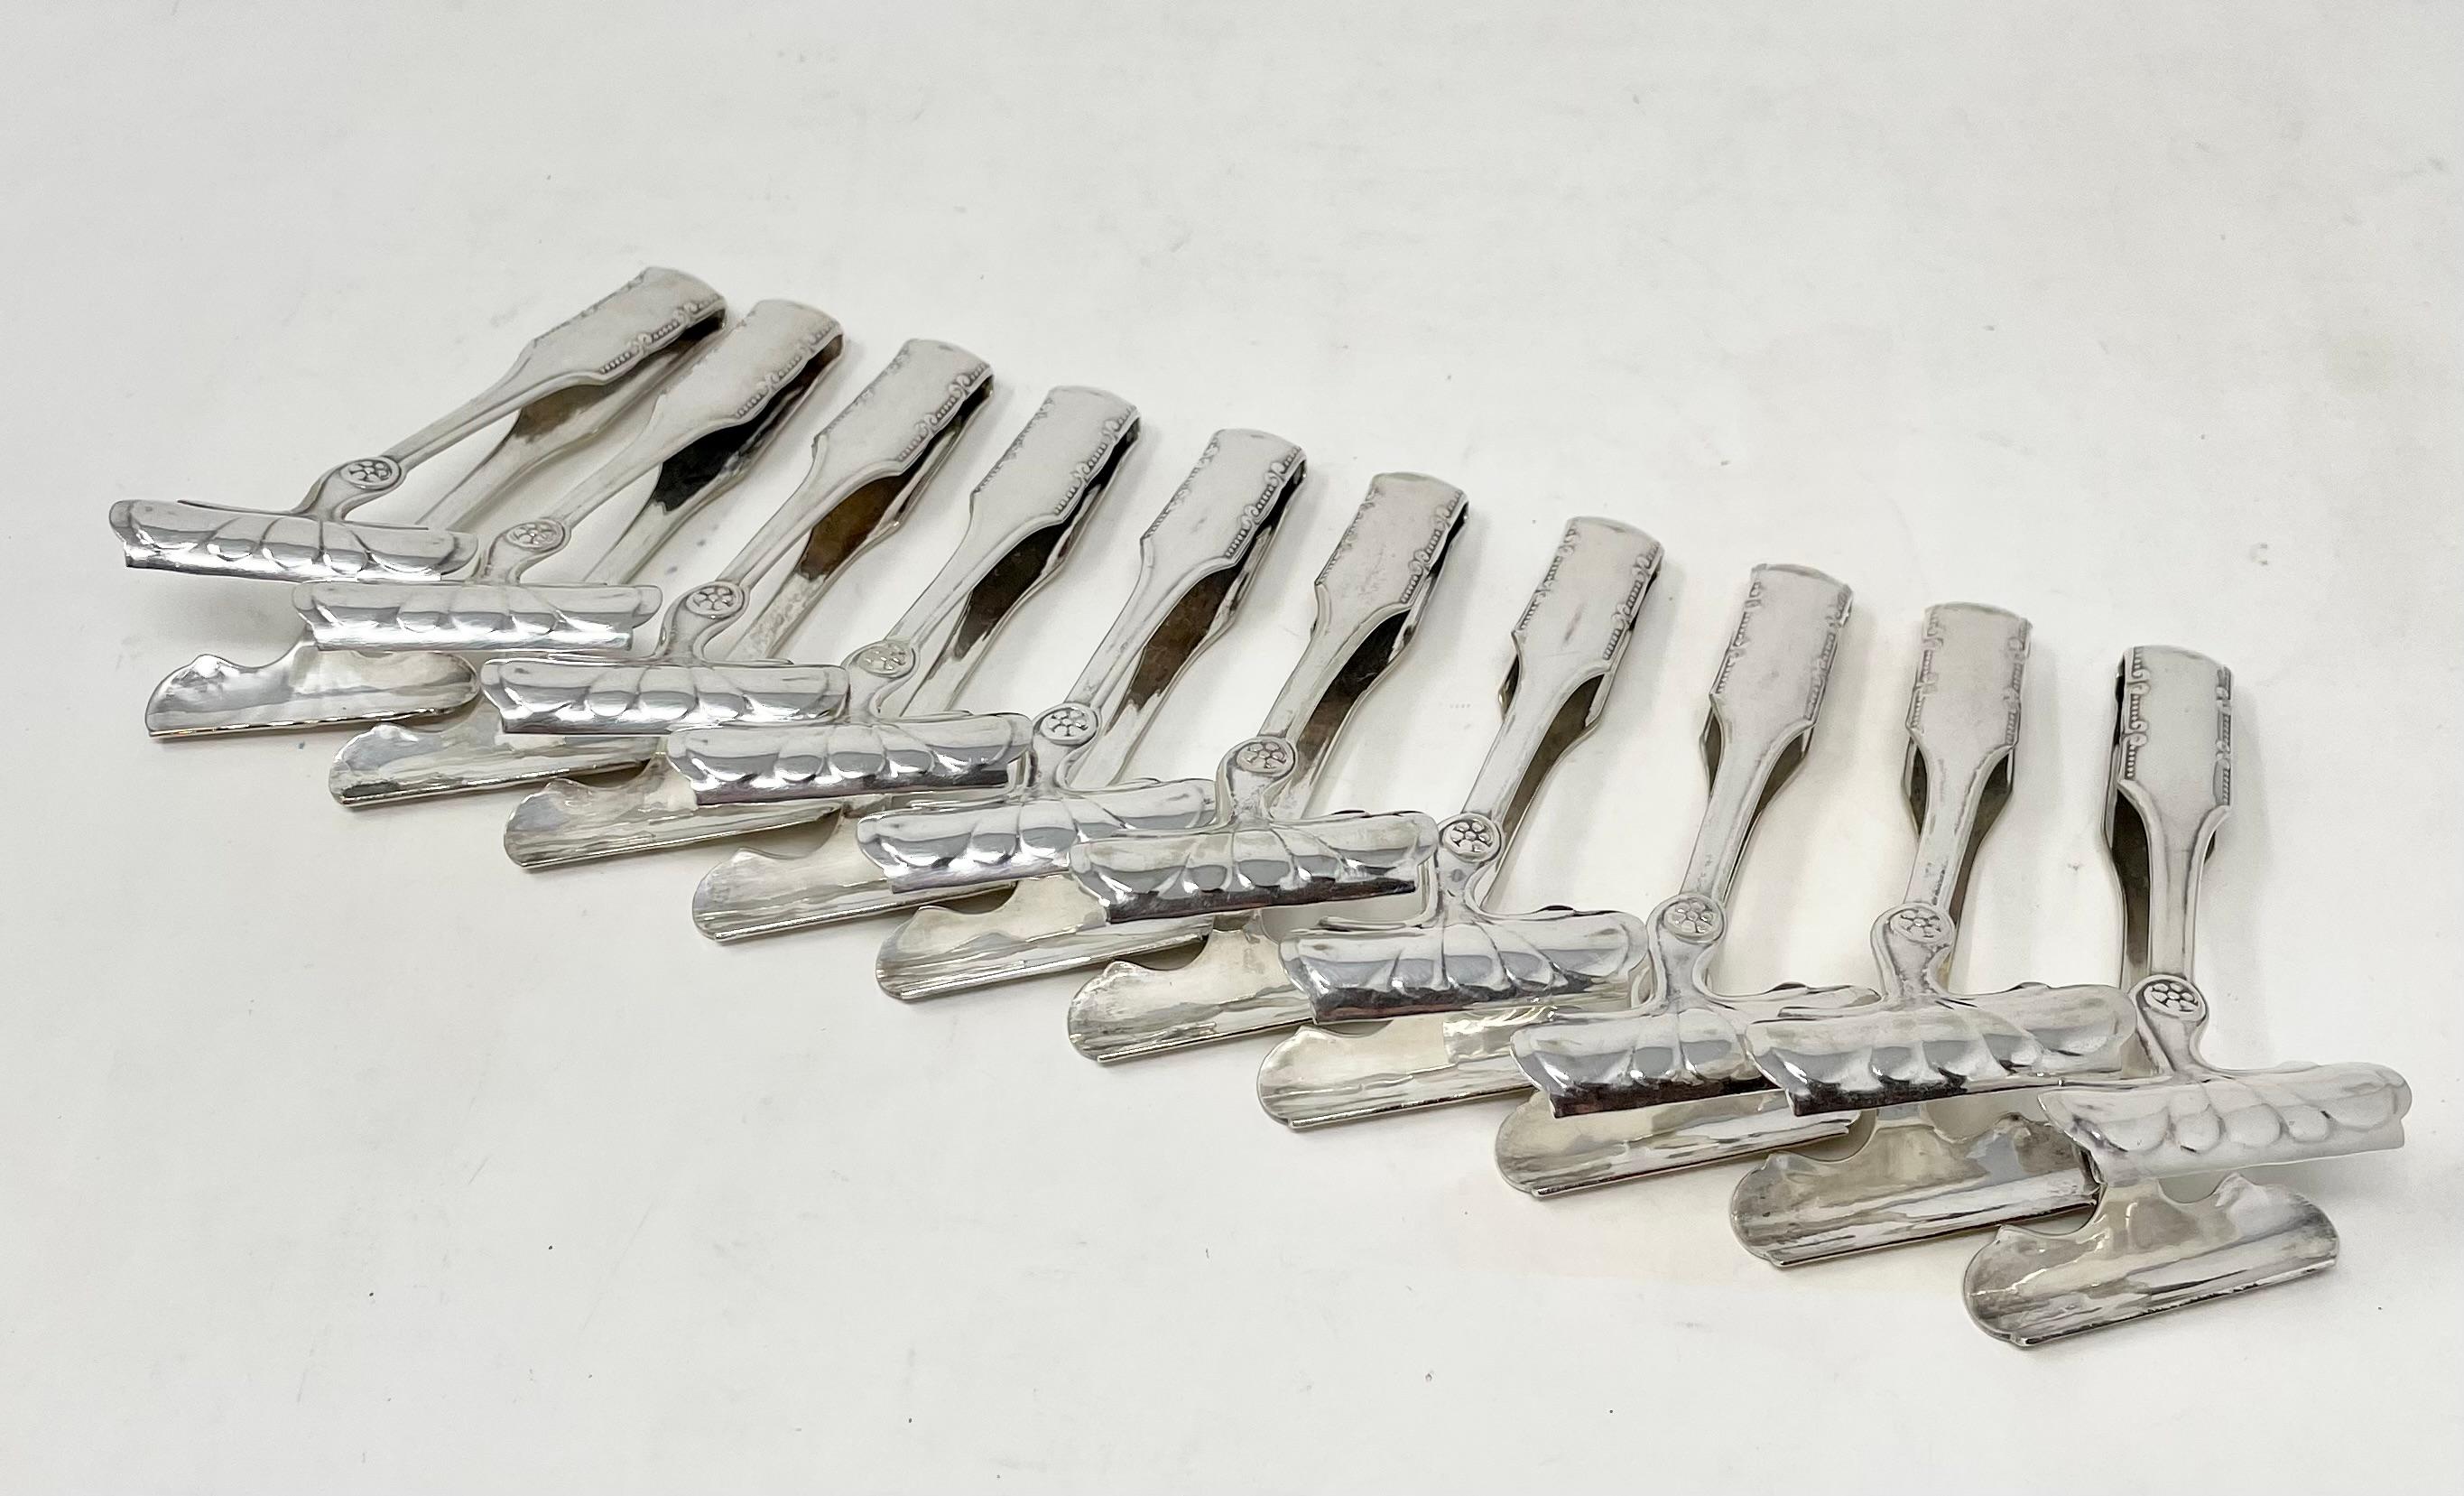 Antique set of 10 Art Nouveau design silver-plated asparagus tongs, circa 1910.
Will work beautifully as server tongs for ice cubes, lemon wedges, pickles & olives, cheeses & meats and a variety of hors d'oeuvres.